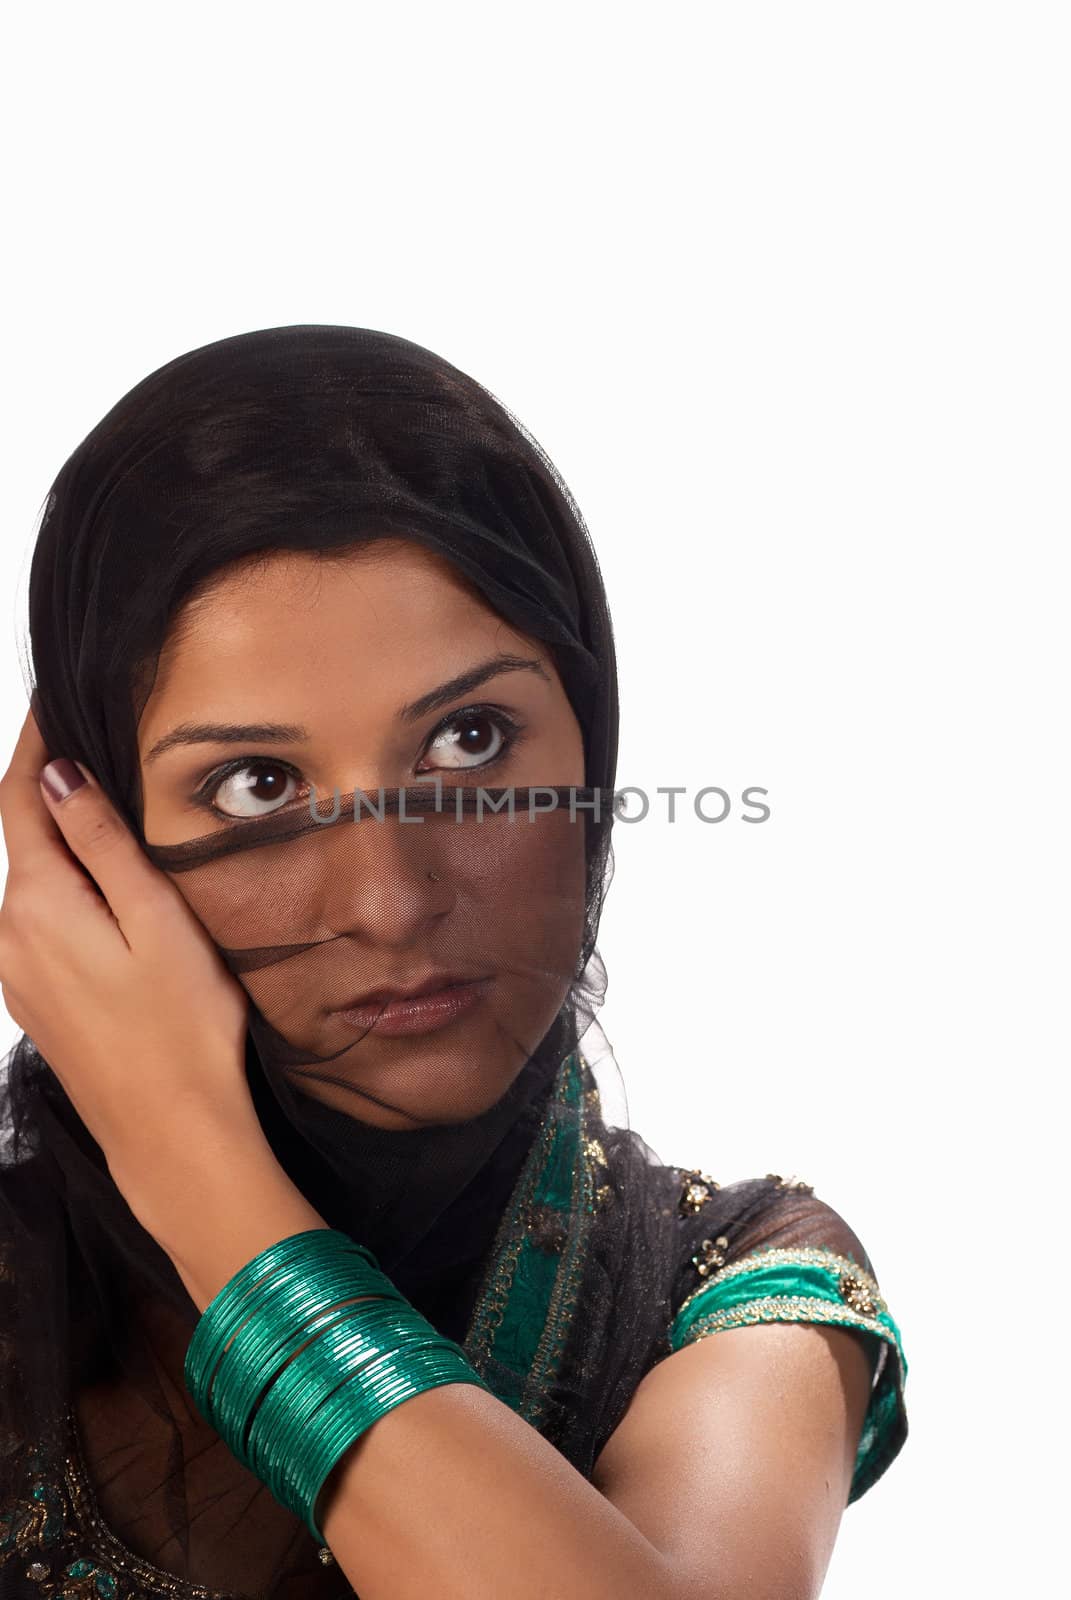 Middle eastern woman dressed in traditional sari